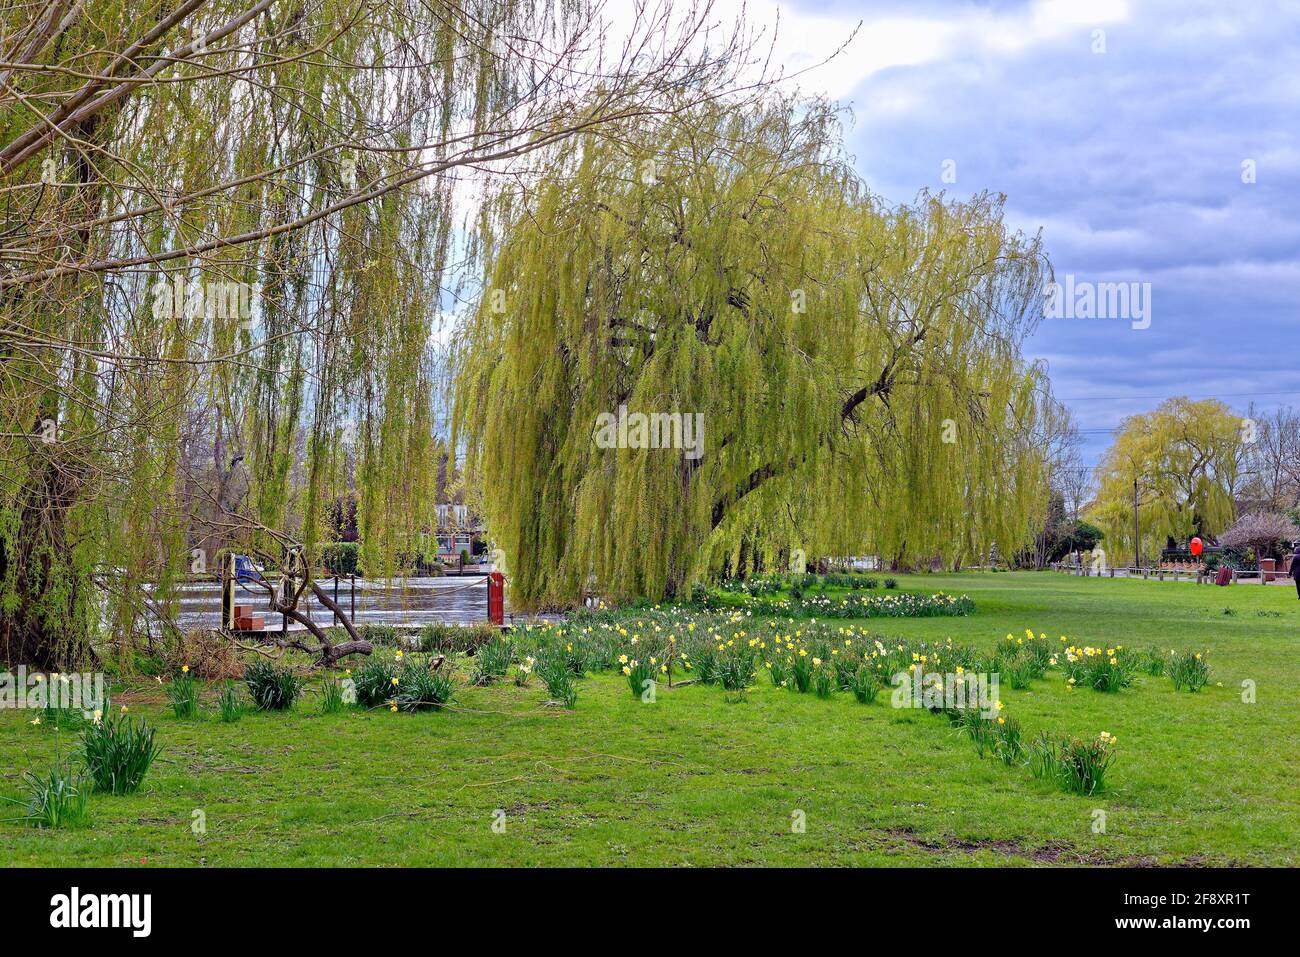 A weeping willow tree, salix chrysocoma in leaf on the riverside with daffodils in flower in the foreground, Shepperton Surrey England UK Stock Photo